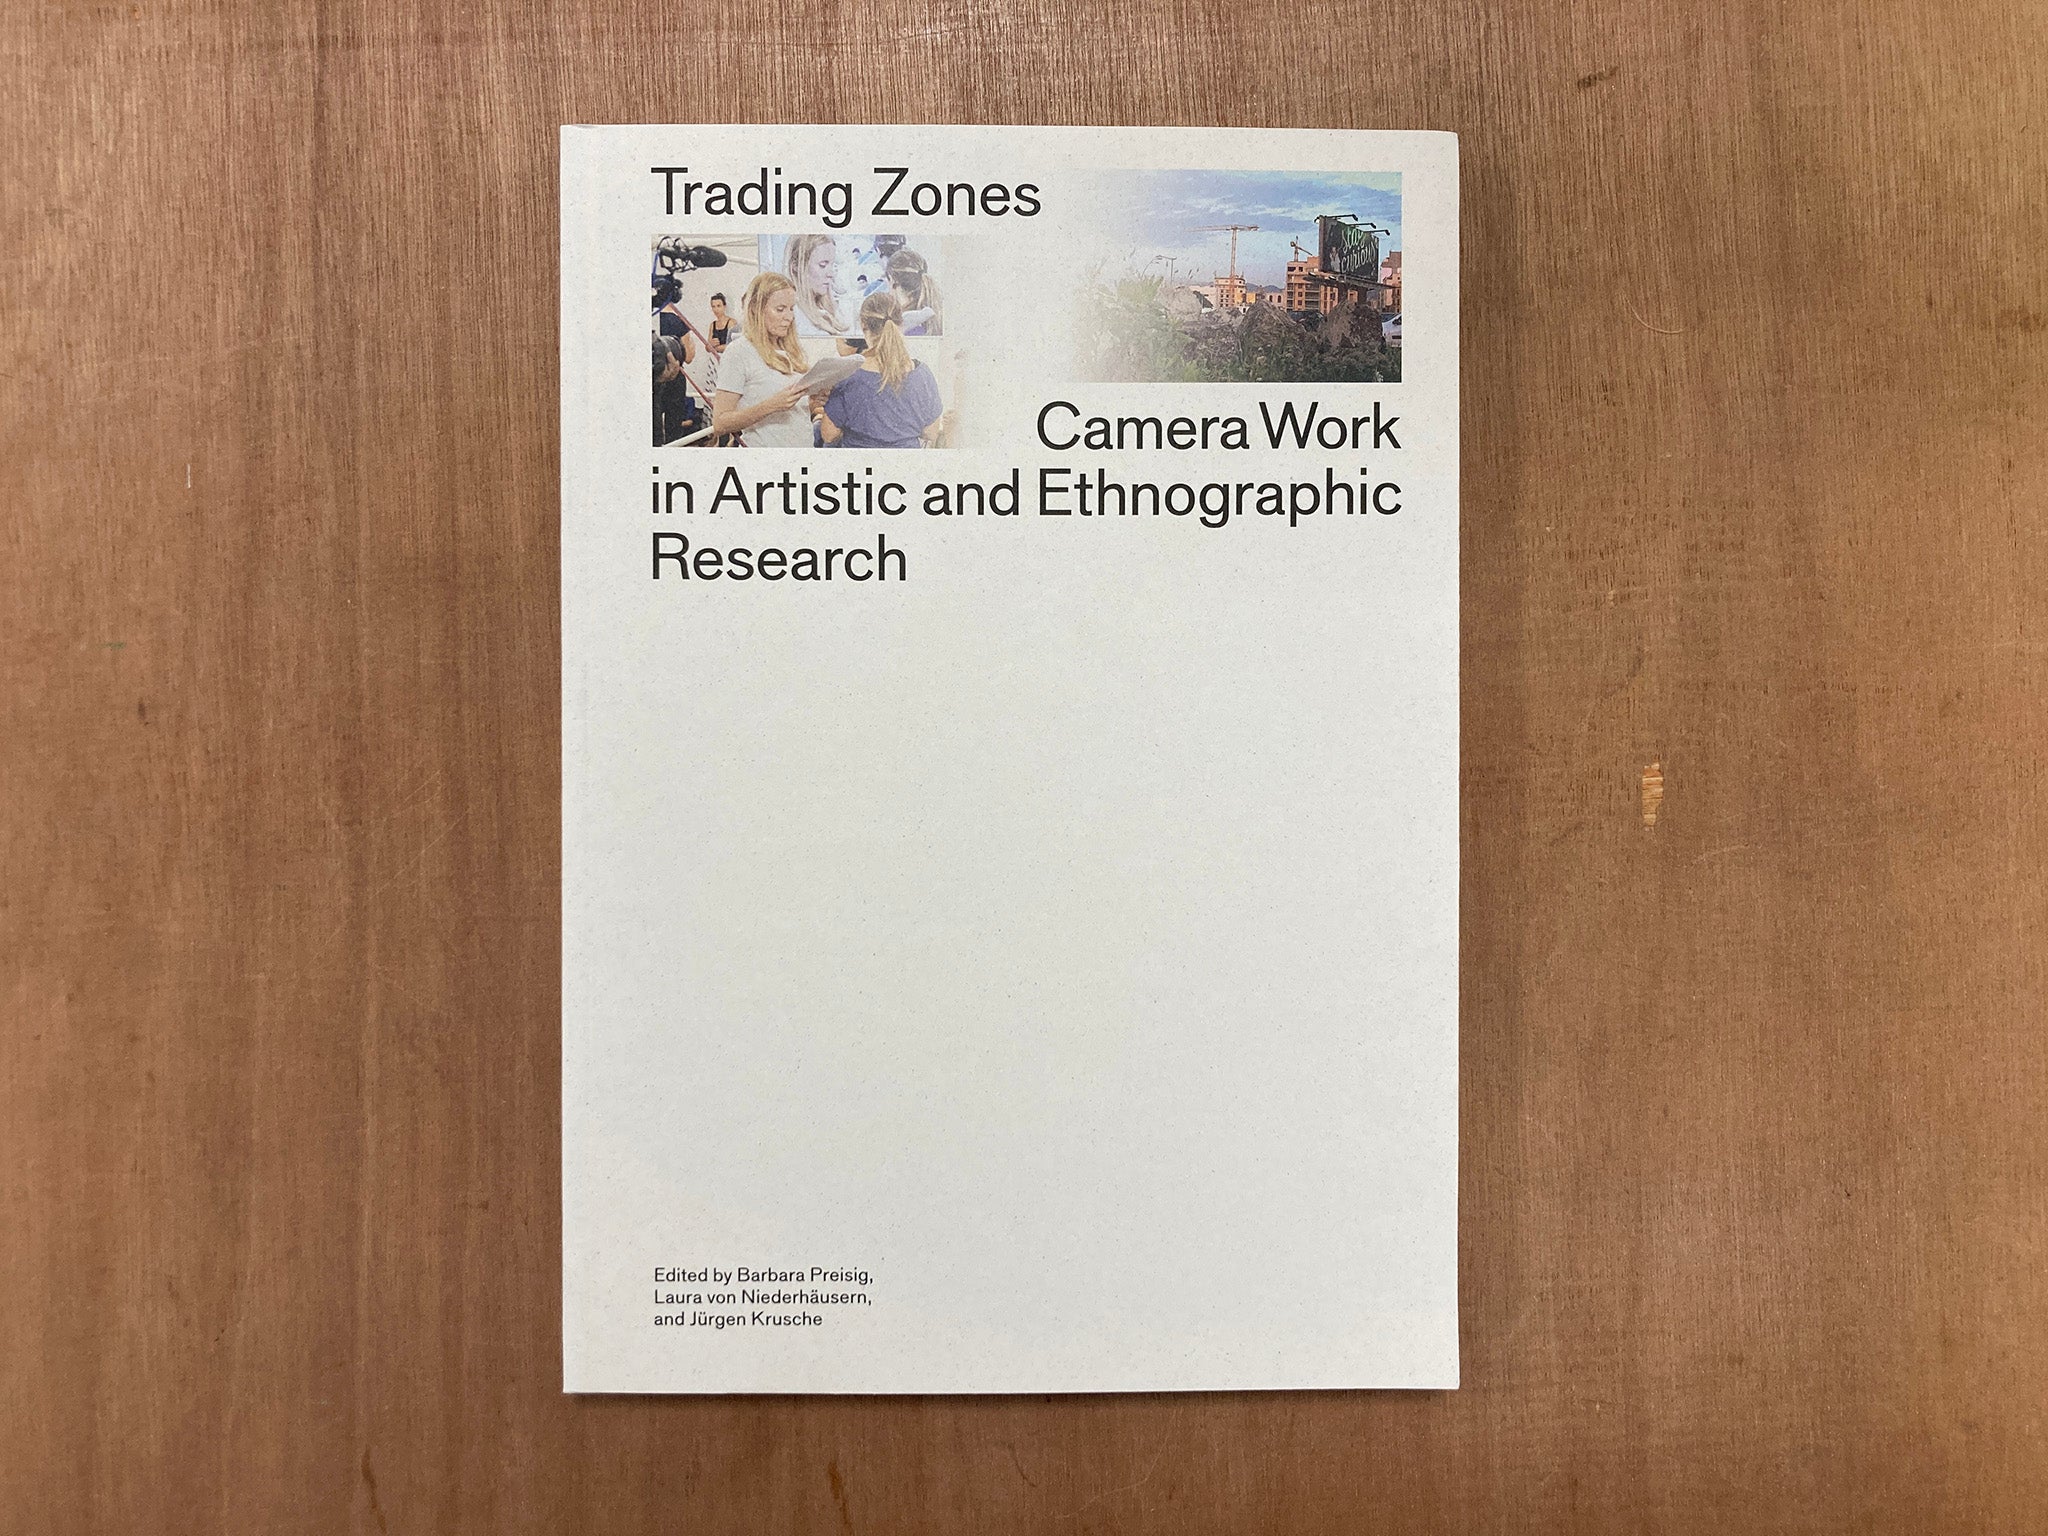 TRADING ZONES – CAMERA WORK IN ARTISTIC AND ETHNOGRAPHIC RESEARCH